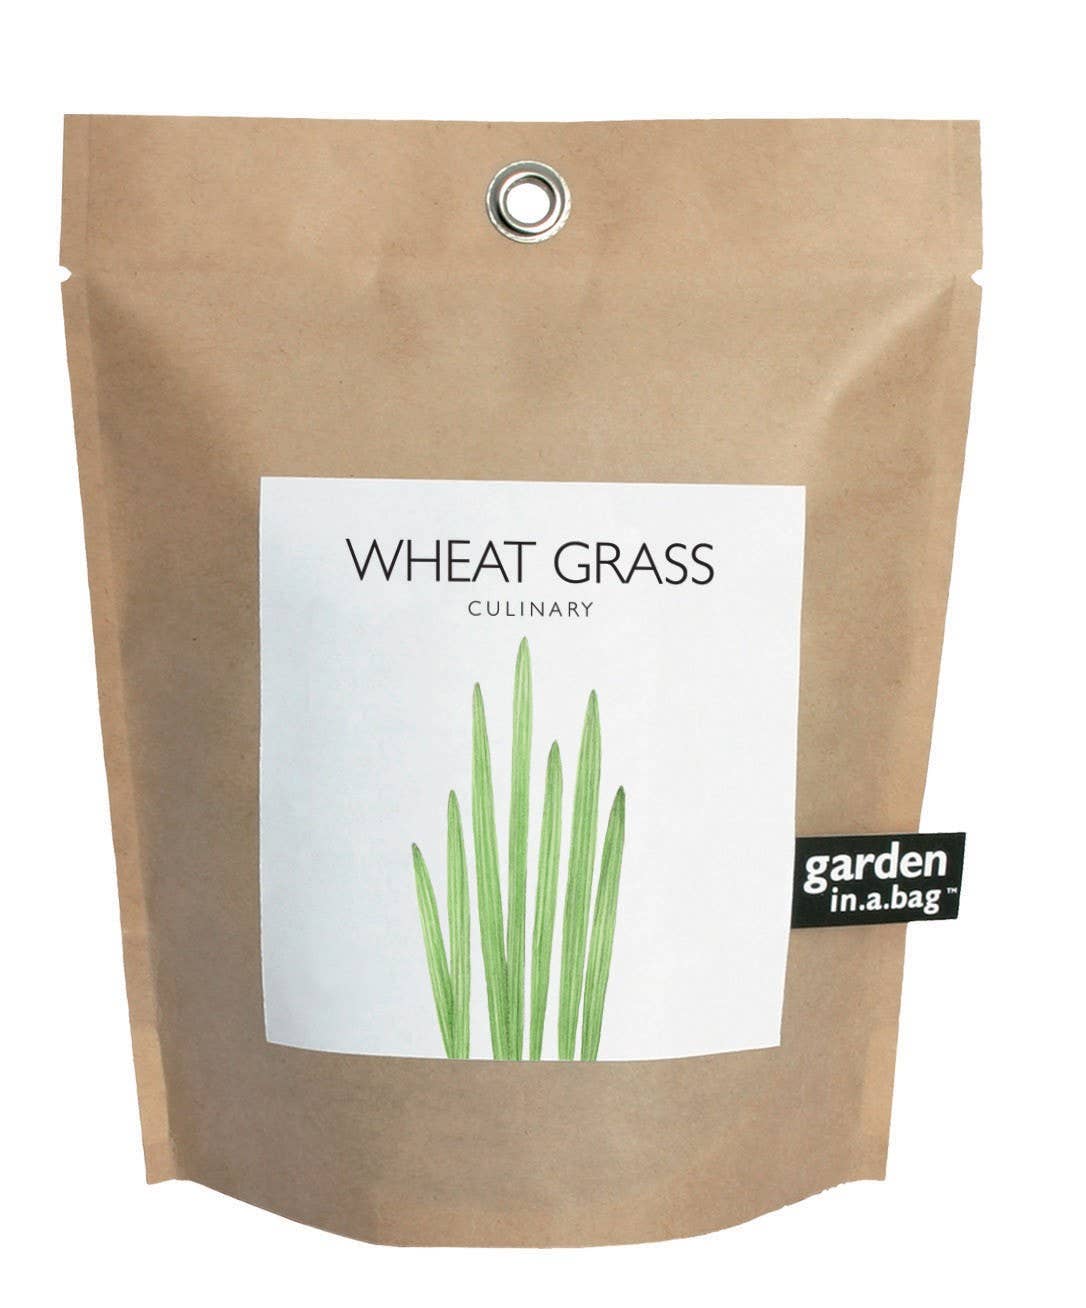 Potting Shed Creations, Ltd. - Garden in a Bag | Wheat Grass